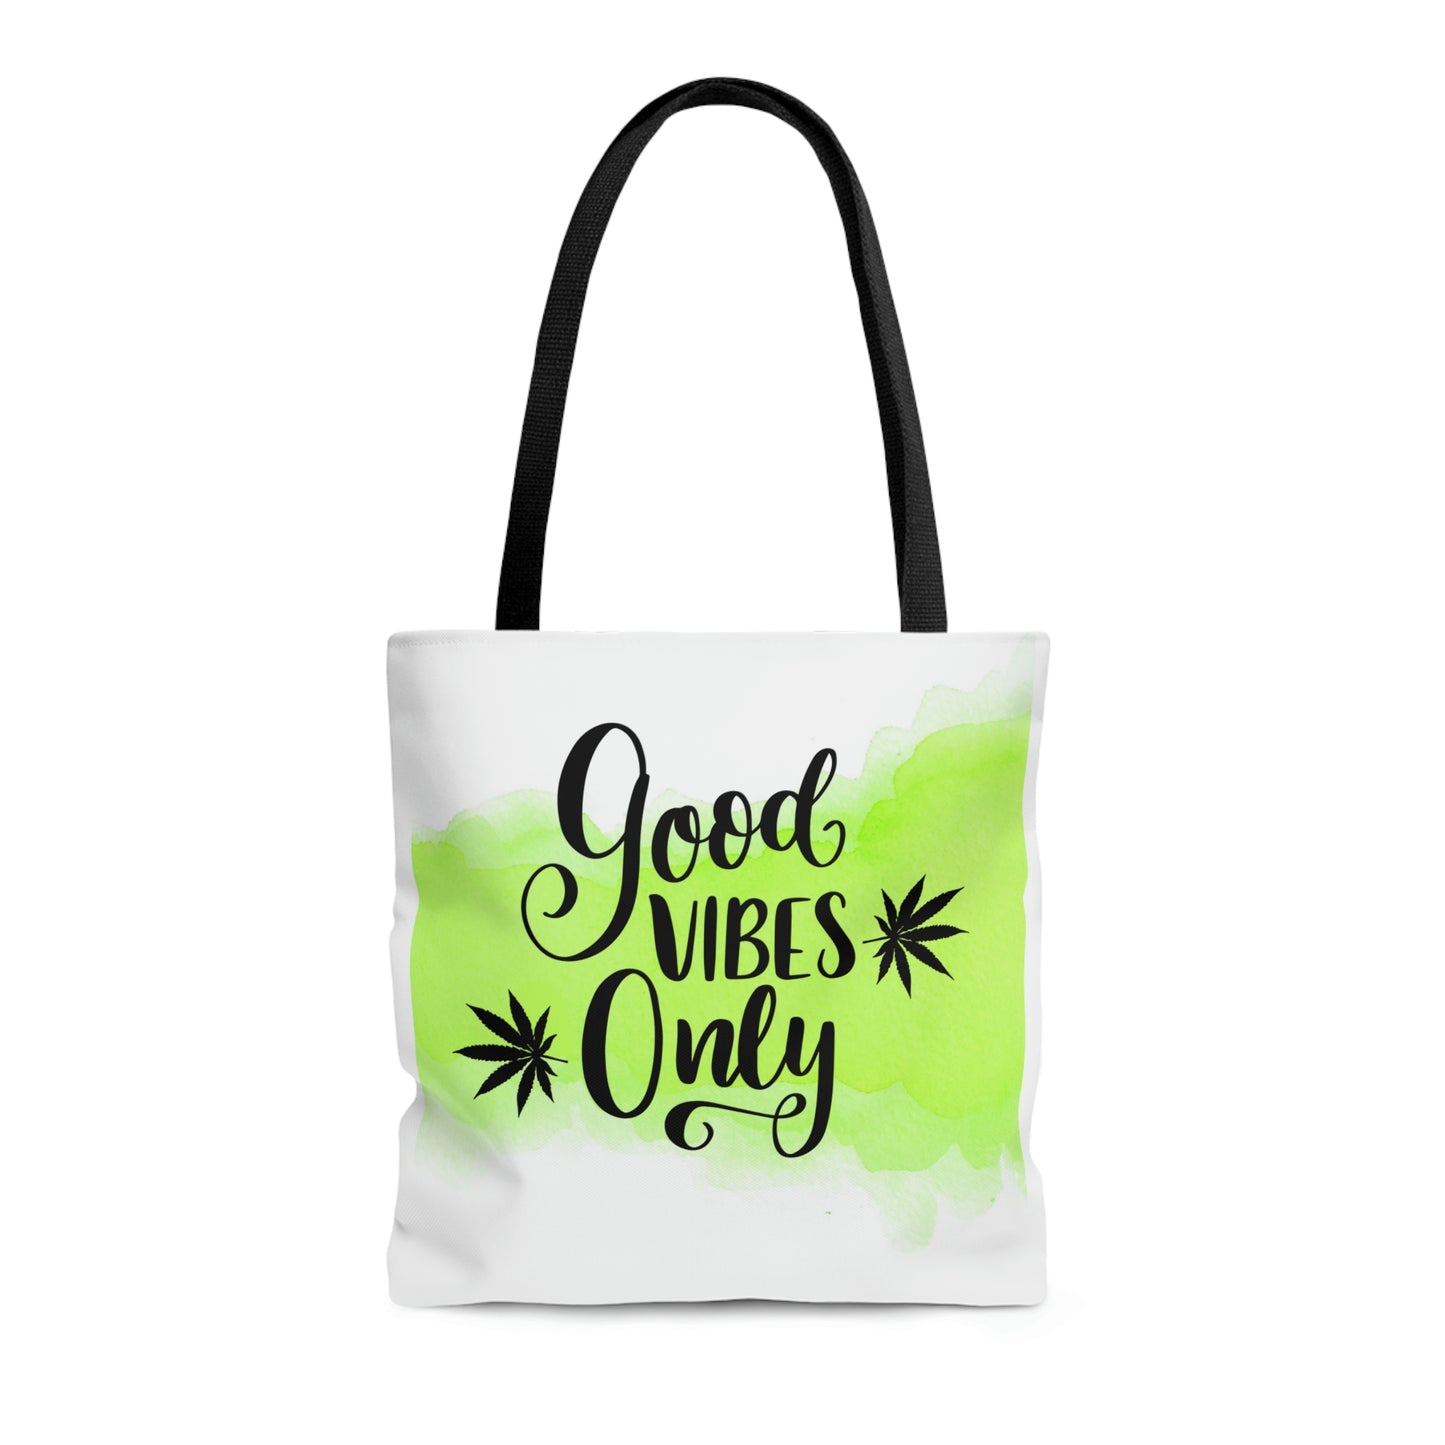 The Good Vibes Only Cannabis Tote bag with a splash of green and cannabis leaves on both sides of the lettering